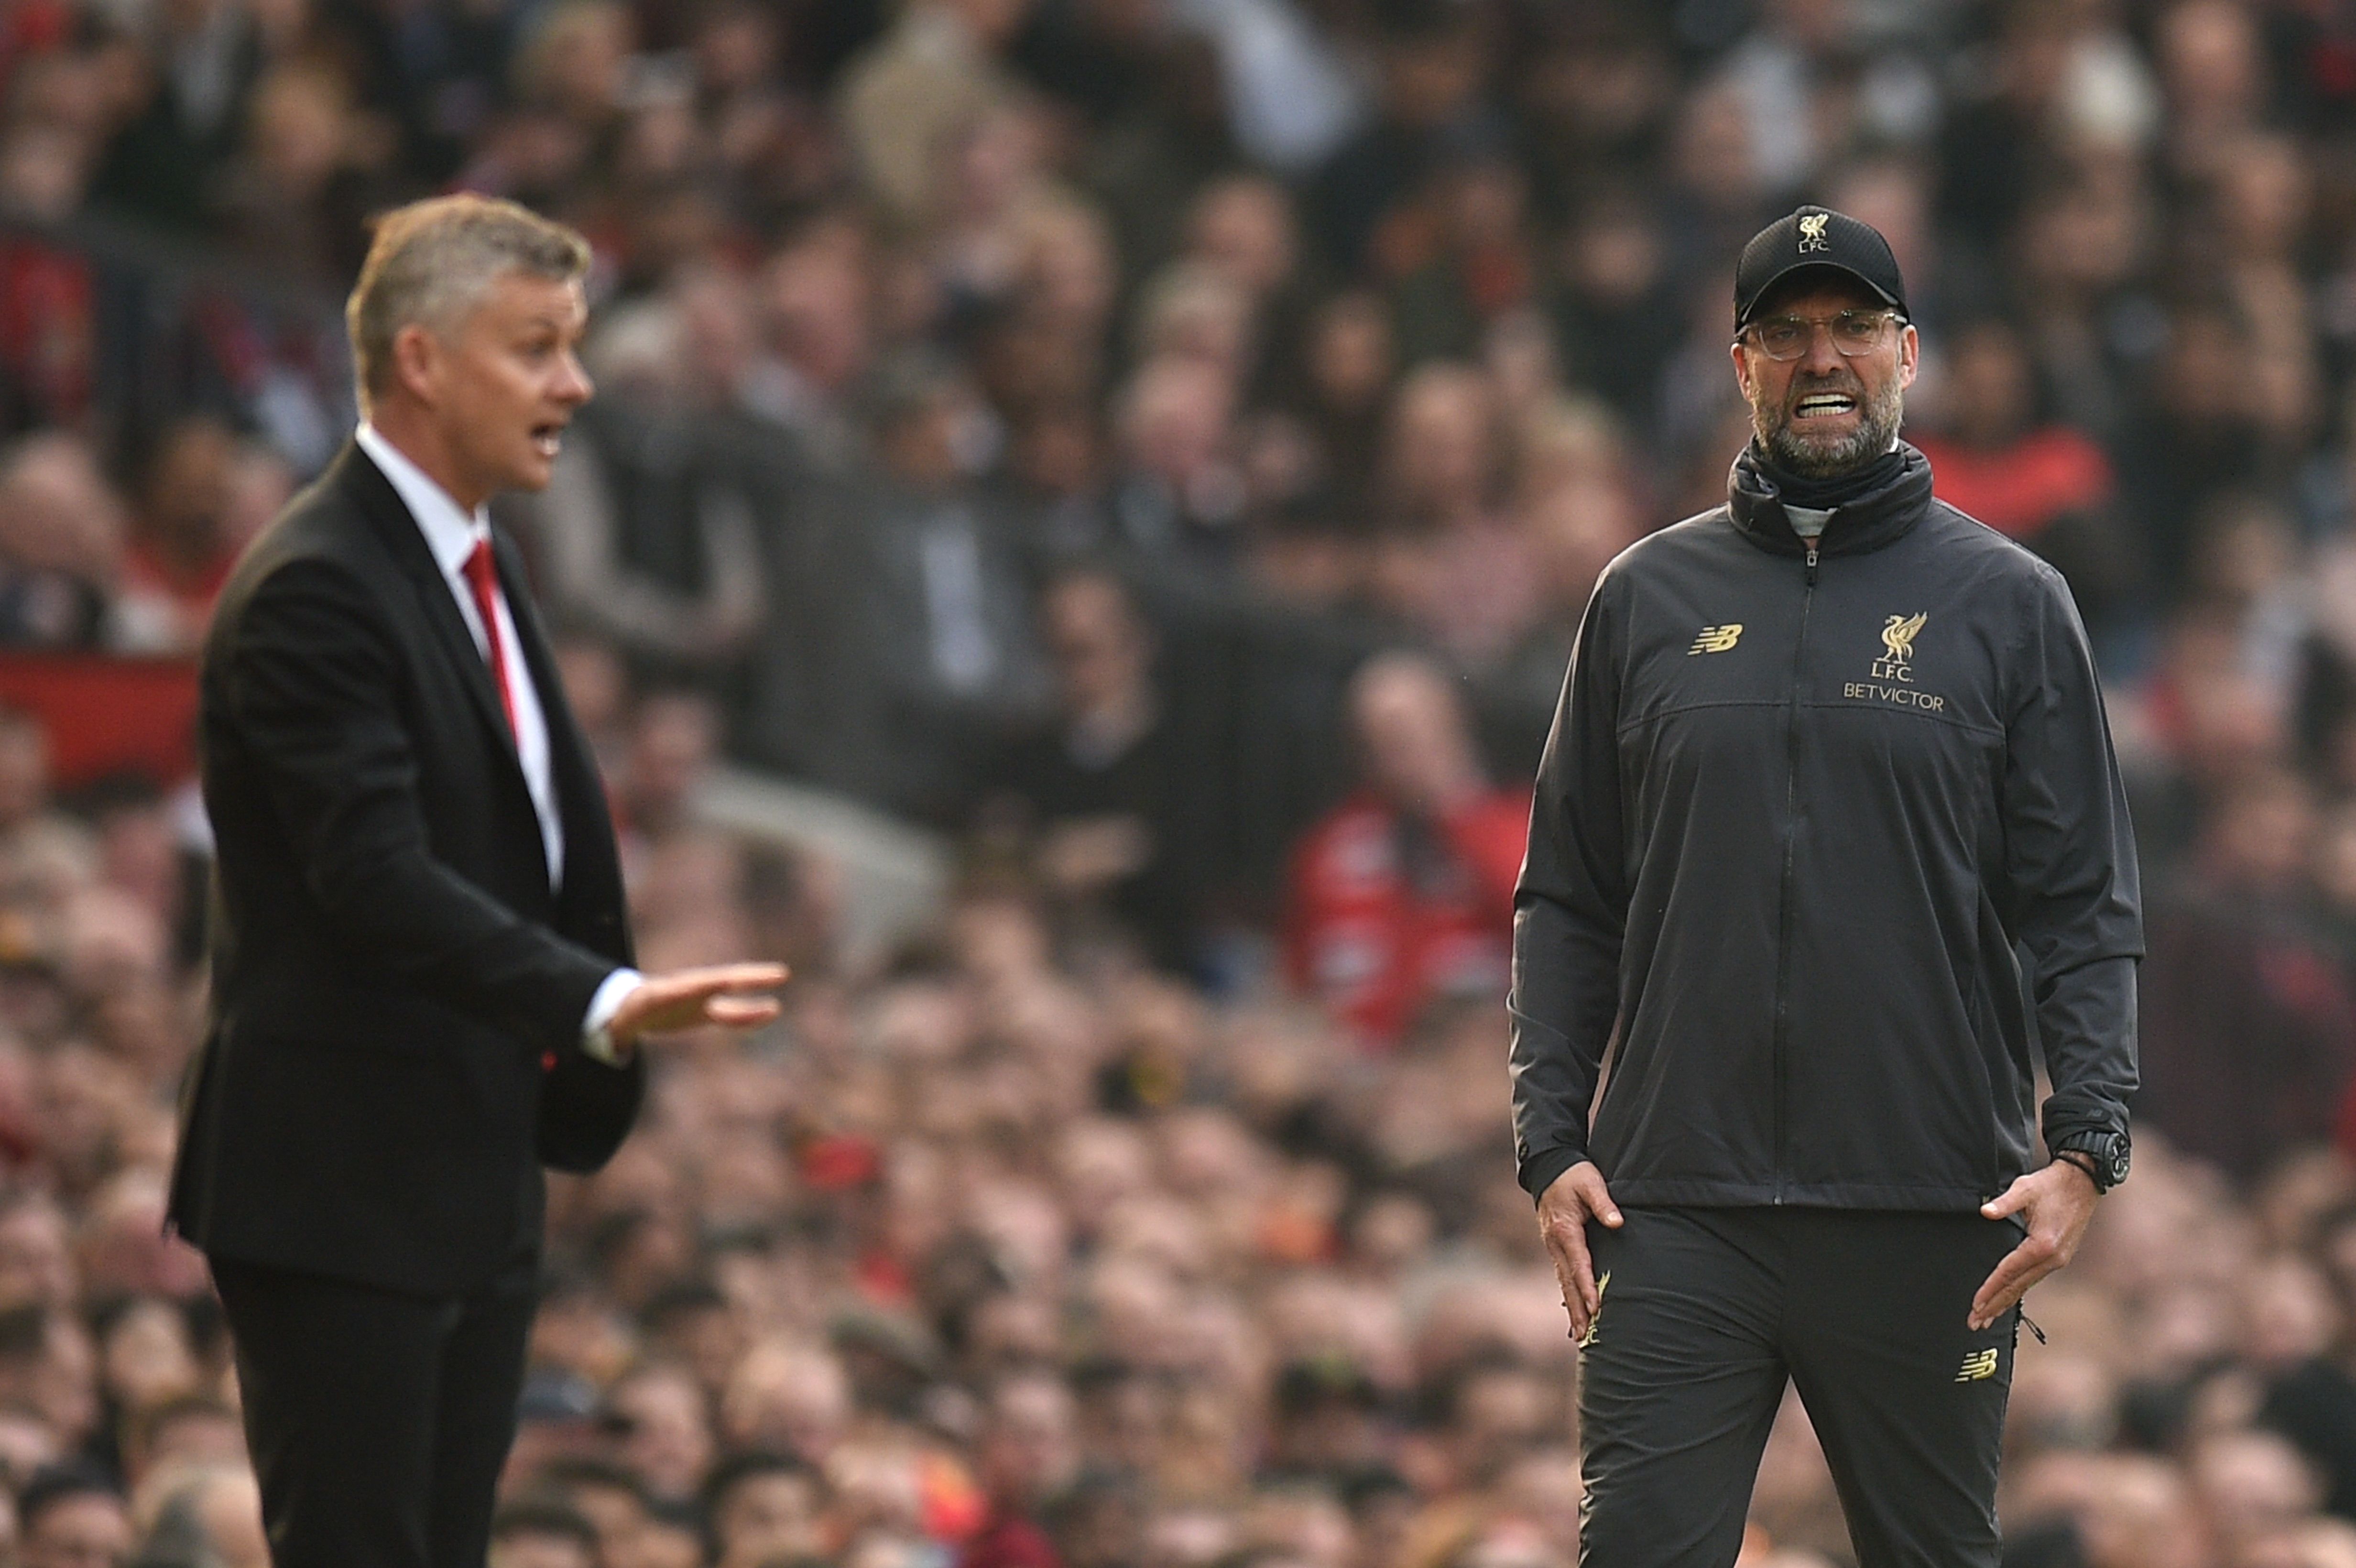 Solskjaer and Klopp will be aiming for the league title (Photo by OLI SCARFF/AFP/Getty Images)